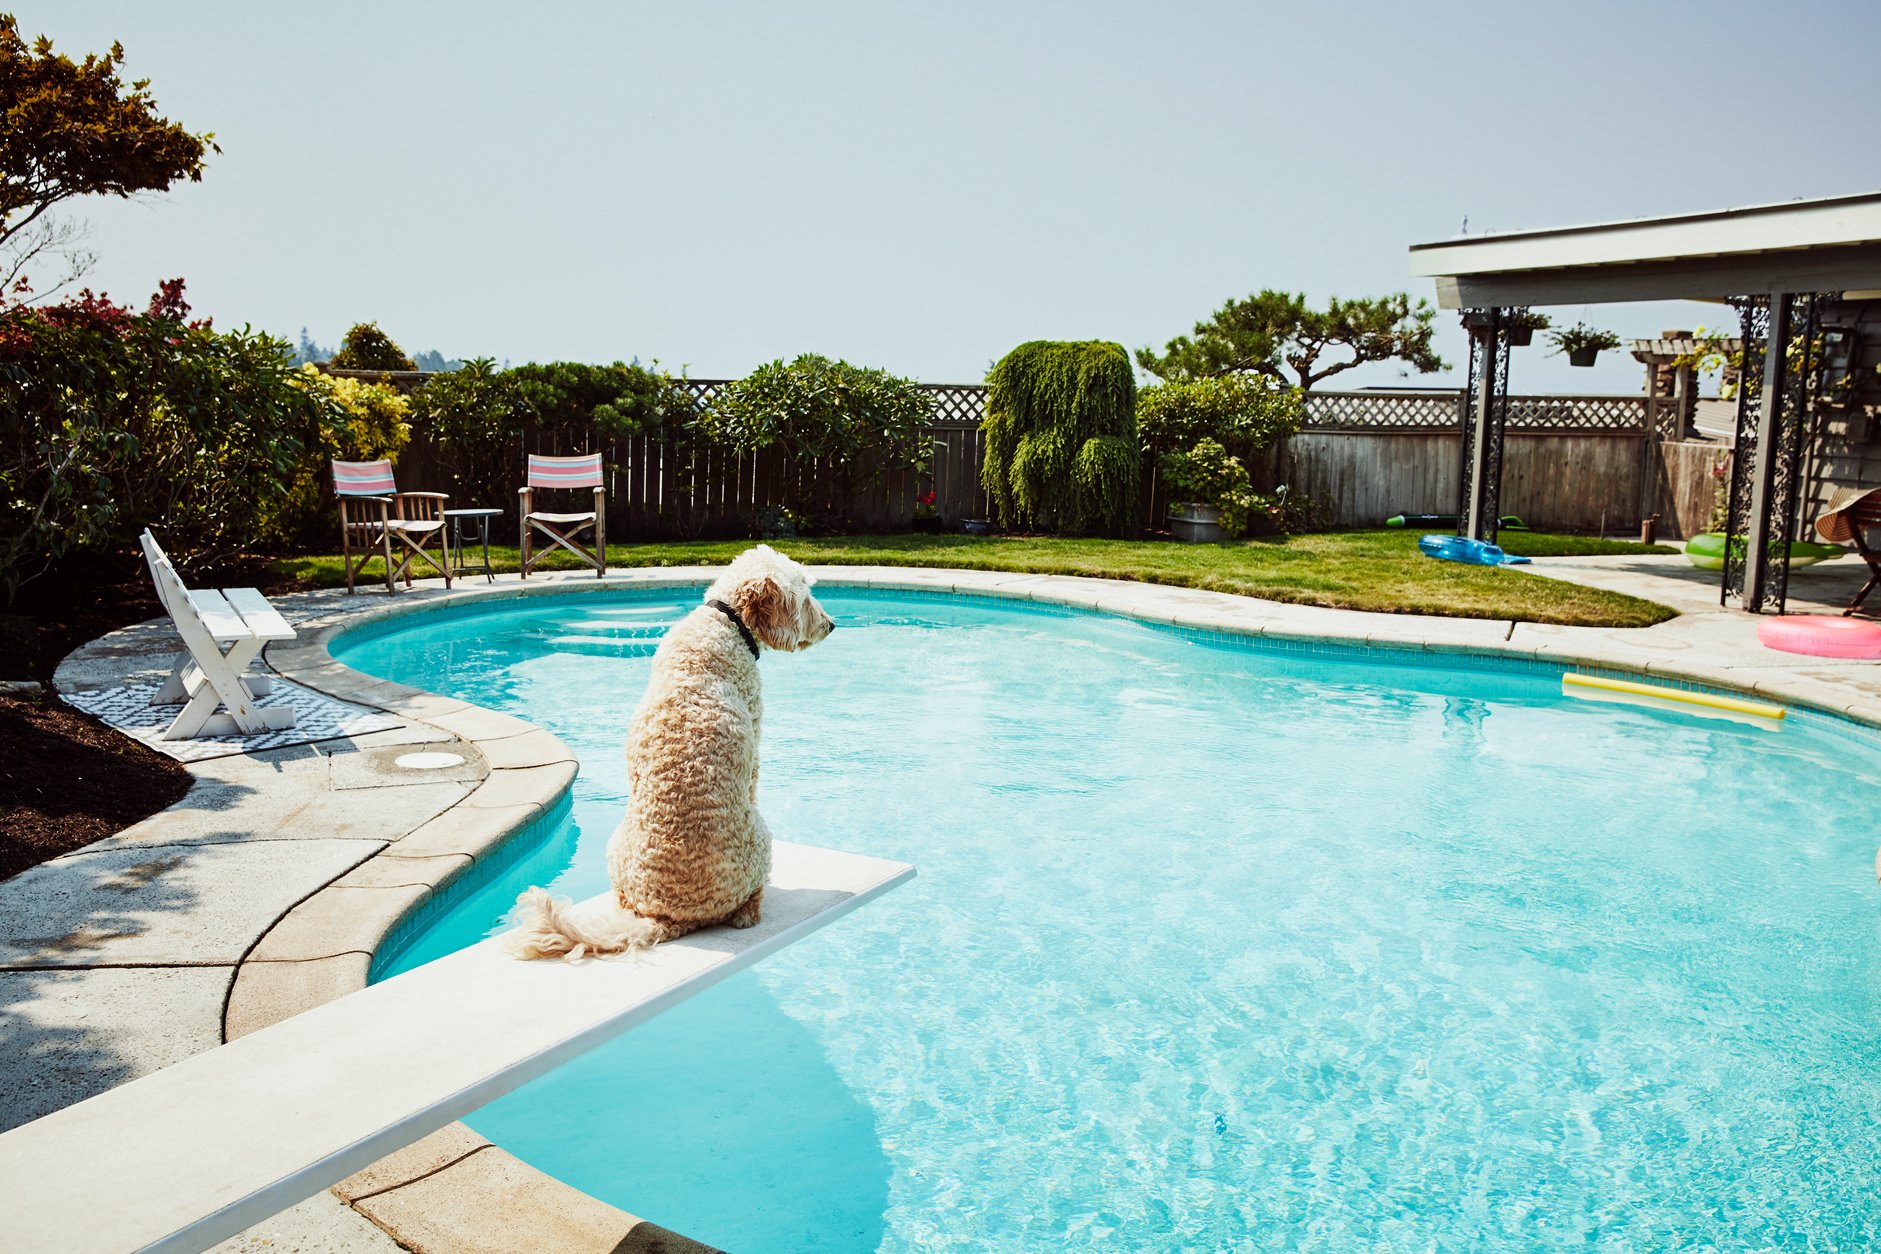 Swimming Pools Are Making a Big Splash on the Housing Market This Summer